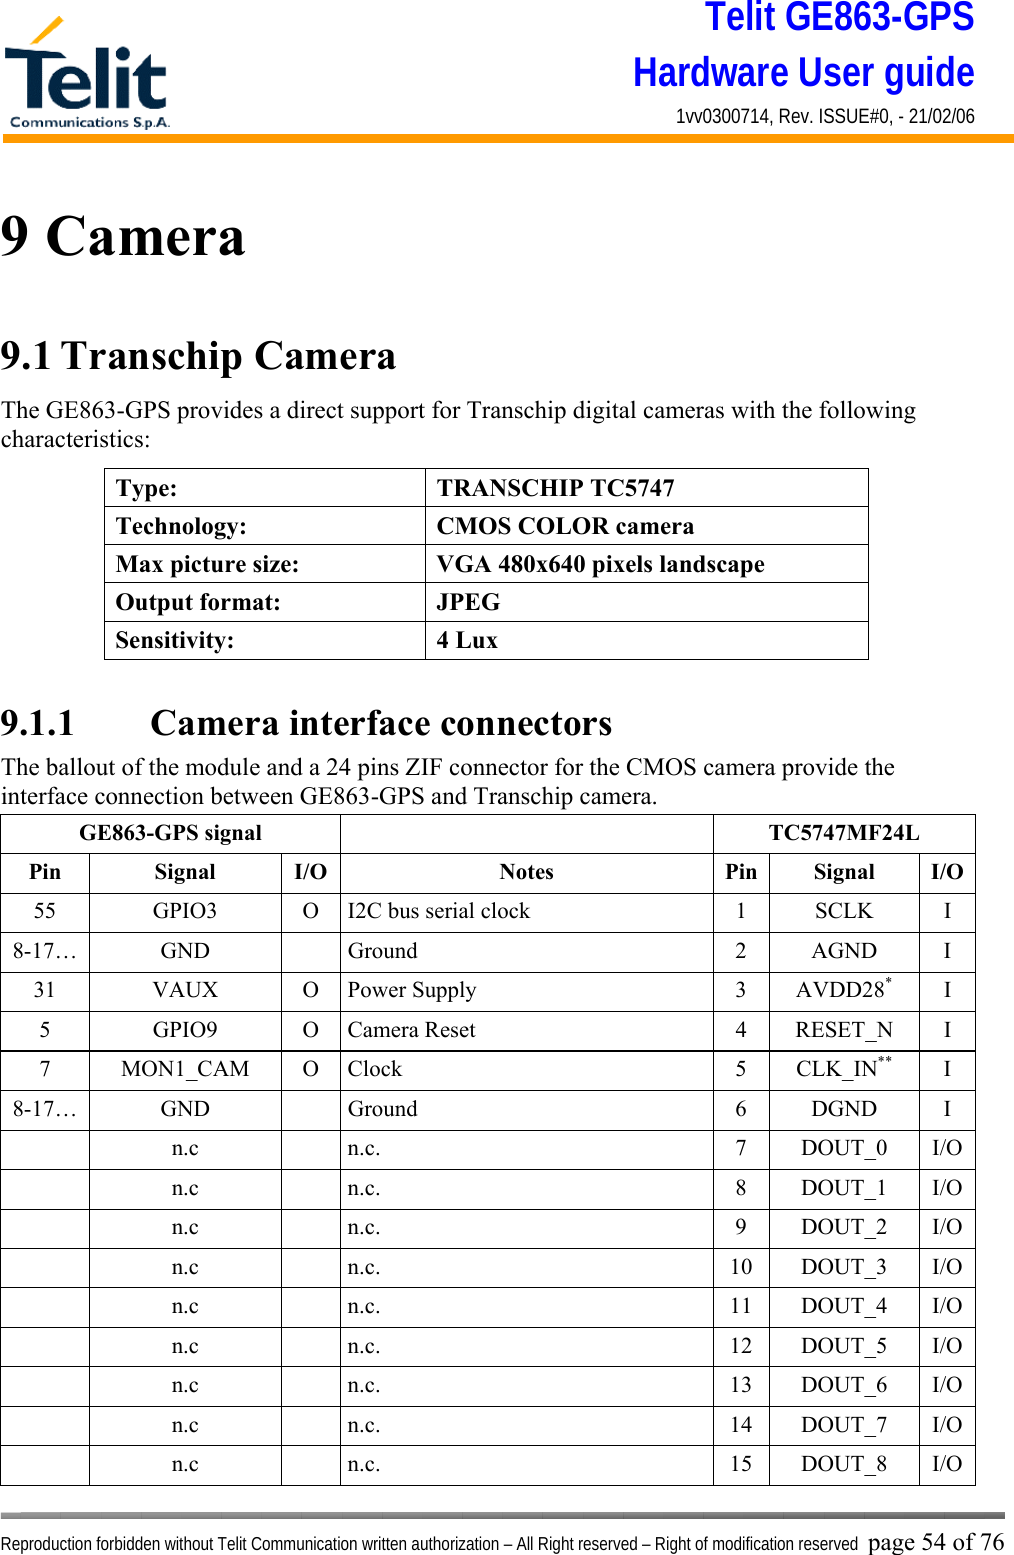 Telit GE863-GPS Hardware User guide 1vv0300714, Rev. ISSUE#0, - 21/02/06    Reproduction forbidden without Telit Communication written authorization – All Right reserved – Right of modification reserved page 54 of 76 9 Camera 9.1 Transchip Camera  The GE863-GPS provides a direct support for Transchip digital cameras with the following characteristics:  9.1.1   Camera interface connectors The ballout of the module and a 24 pins ZIF connector for the CMOS camera provide the interface connection between GE863-GPS and Transchip camera. GE863-GPS signal    TC5747MF24L Pin Signal I/O  Notes  Pin Signal I/O55  GPIO3  O  I2C bus serial clock  1  SCLK  I 8-17… GND   Ground  2 AGND I 31 VAUX O Power Supply  3 AVDD28* I 5 GPIO9 O Camera Reset  4 RESET_N I 7 MON1_CAM O Clock  5 CLK_IN** I 8-17… GND   Ground  6 DGND I  n.c  n.c.  7 DOUT_0 I/O  n.c  n.c.  8 DOUT_1  I/O  n.c  n.c.  9 DOUT_2 I/O  n.c  n.c.  10 DOUT_3 I/O  n.c  n.c.  11 DOUT_4 I/O  n.c  n.c.  12 DOUT_5 I/O  n.c  n.c.  13 DOUT_6 I/O  n.c  n.c.  14 DOUT_7 I/O  n.c  n.c.  15 DOUT_8 I/O Type: TRANSCHIP TC5747 Technology:  CMOS COLOR camera Max picture size:  VGA 480x640 pixels landscape Output format:  JPEG Sensitivity: 4 Lux 